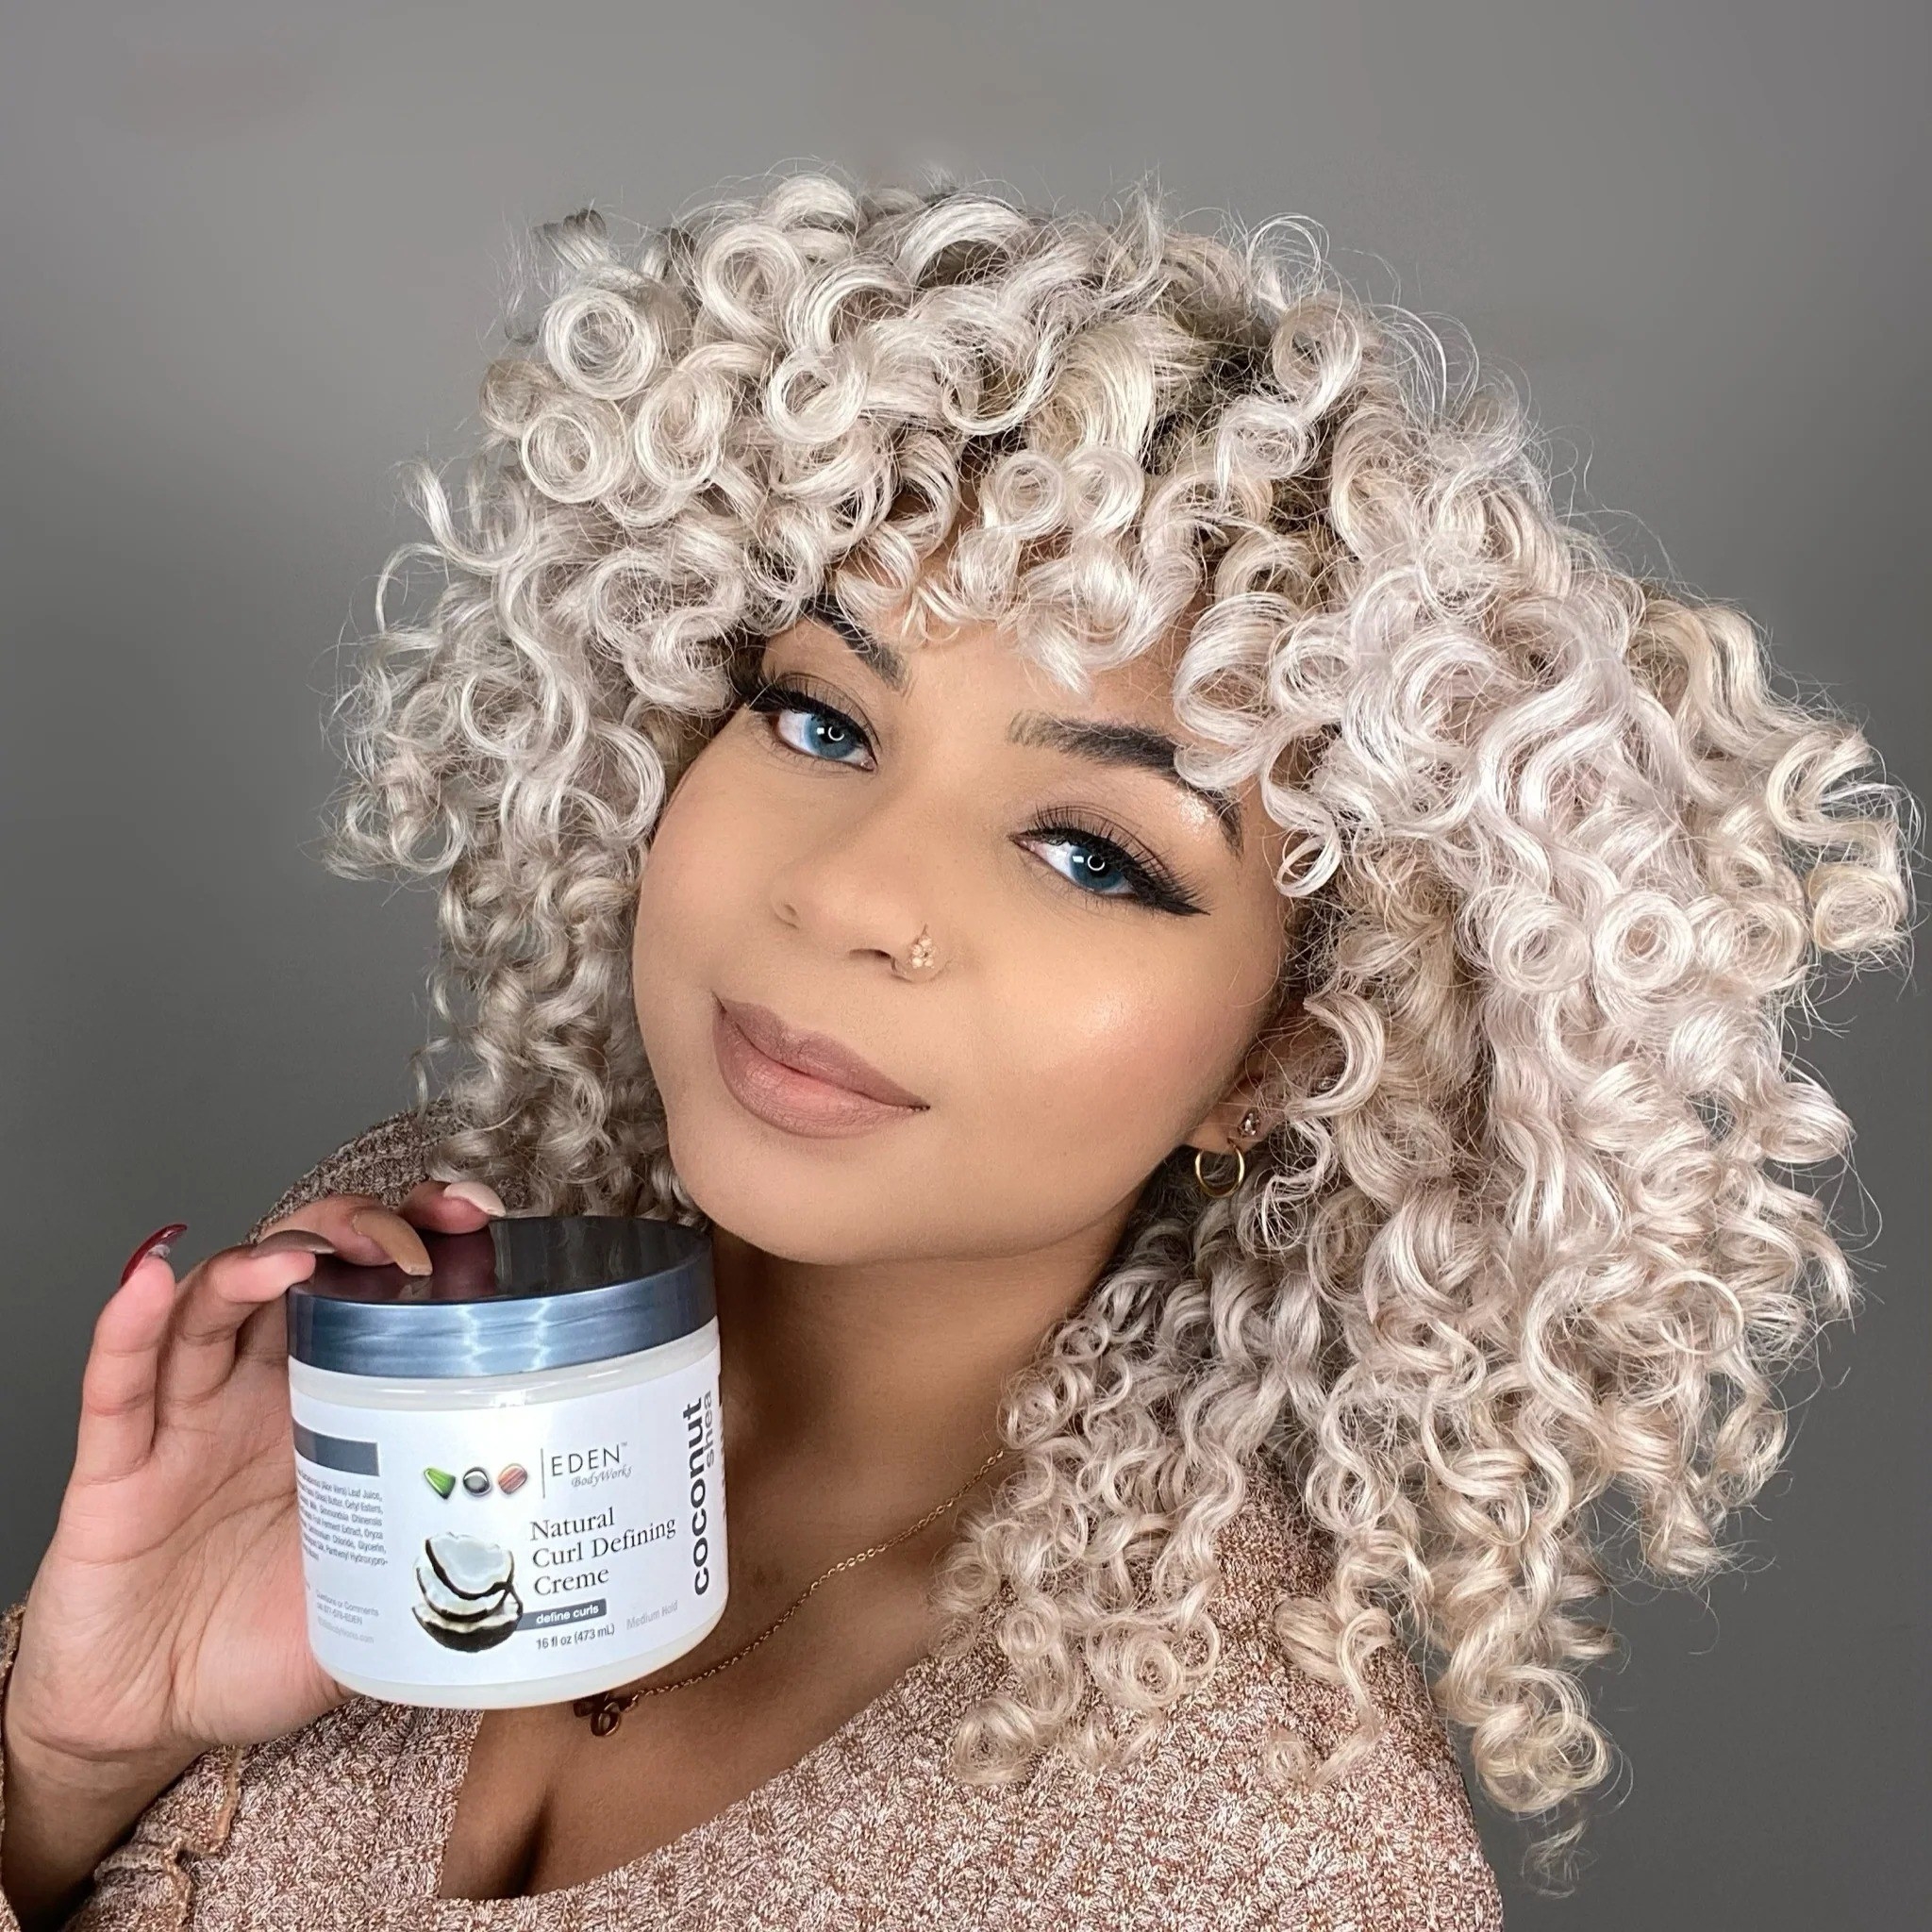 a model with soft-looking defined curls holding the jar of hair creme